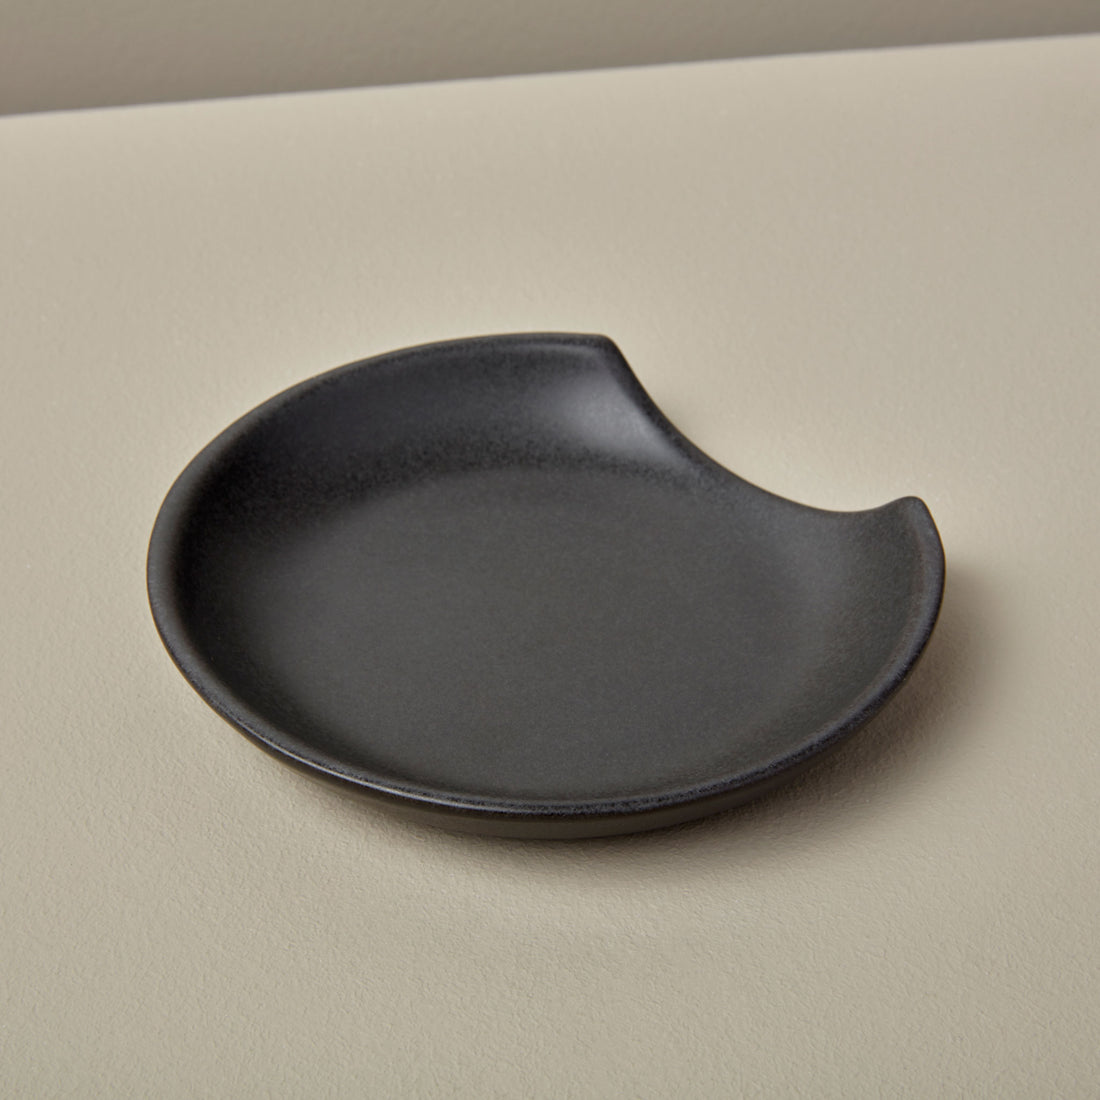 https://cdn.shopify.com/s/files/1/0376/0920/9900/products/Be-Home_stoneware-spoon-rest-black_52-161.jpg?v=1606158078&width=1100